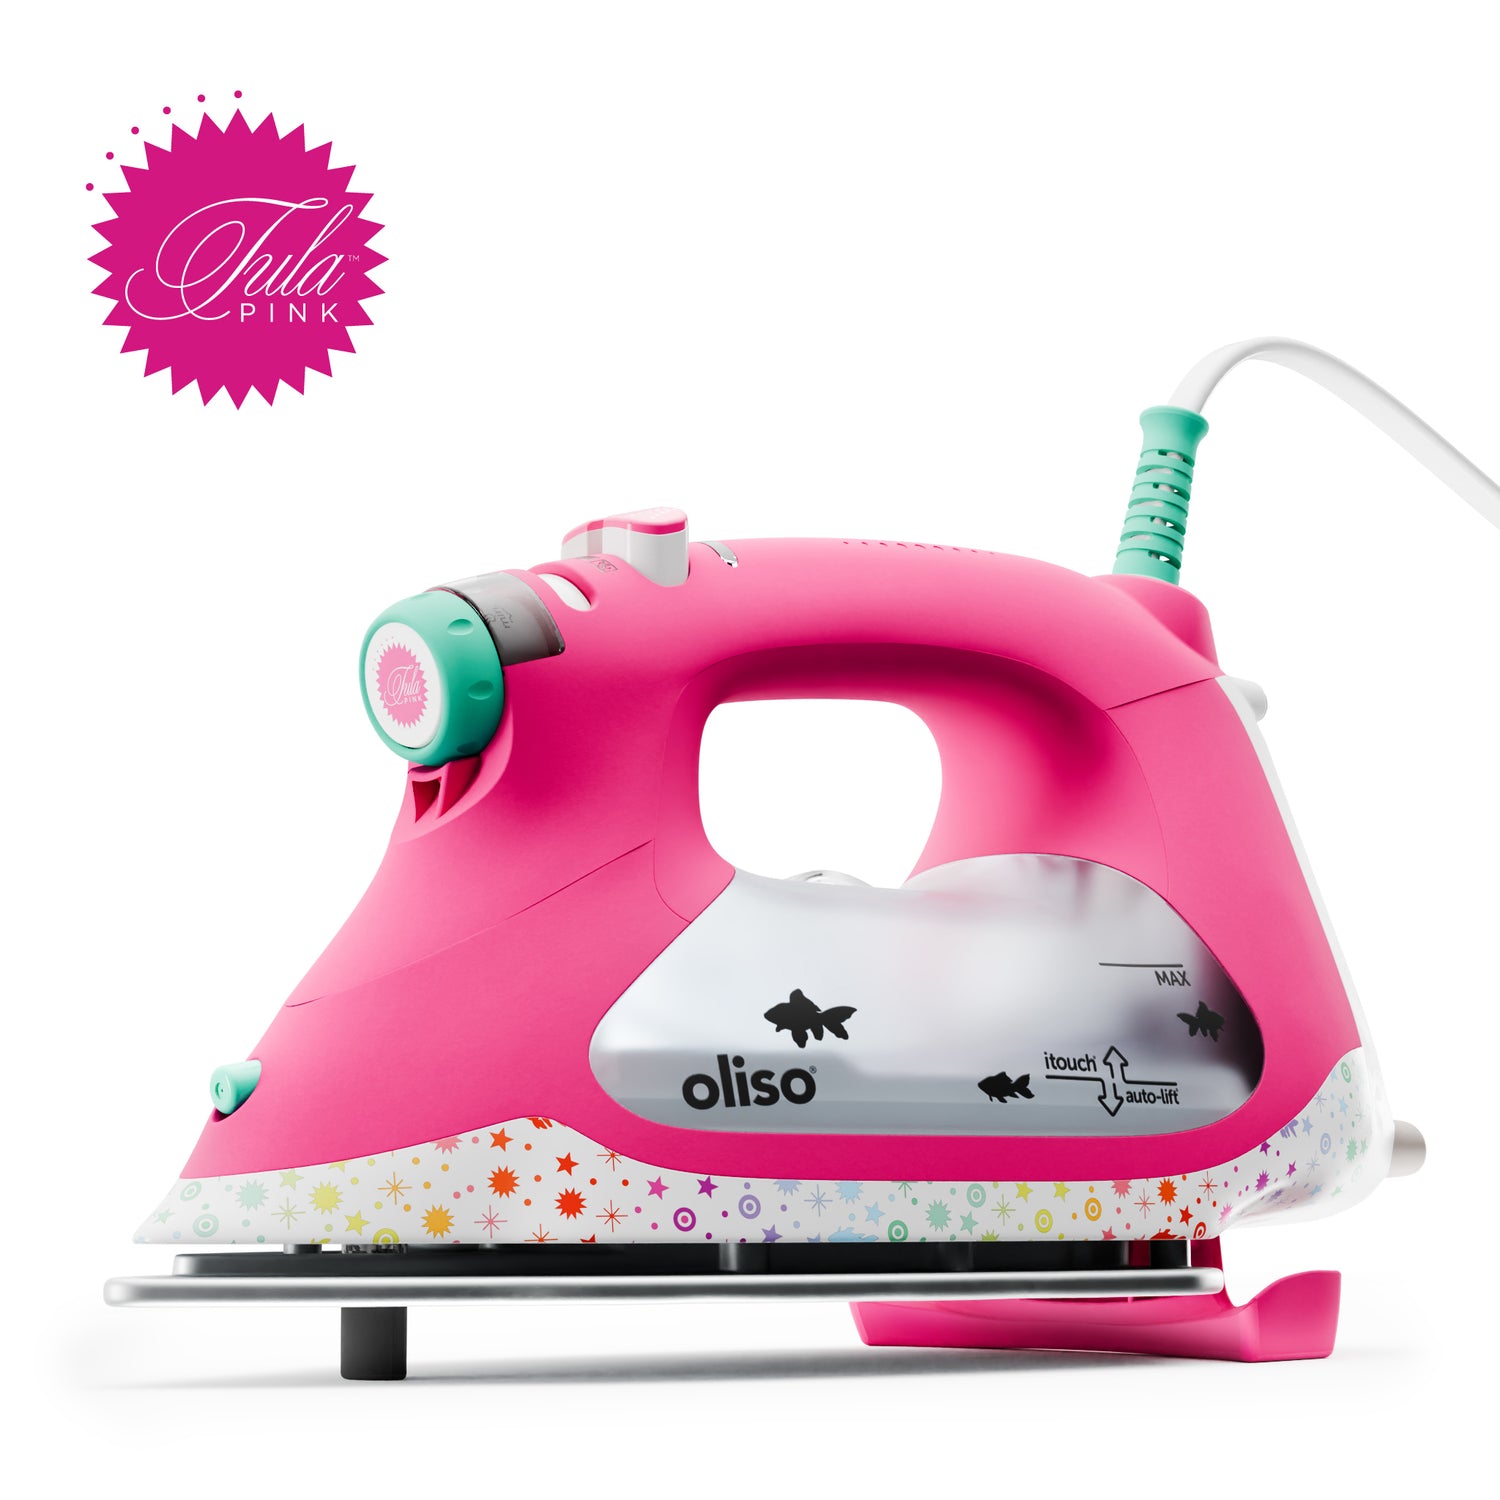 Exclusive Tula Pink x Oliso Iron features goldfish from her Besties print, Treading Water, it captures Tula&